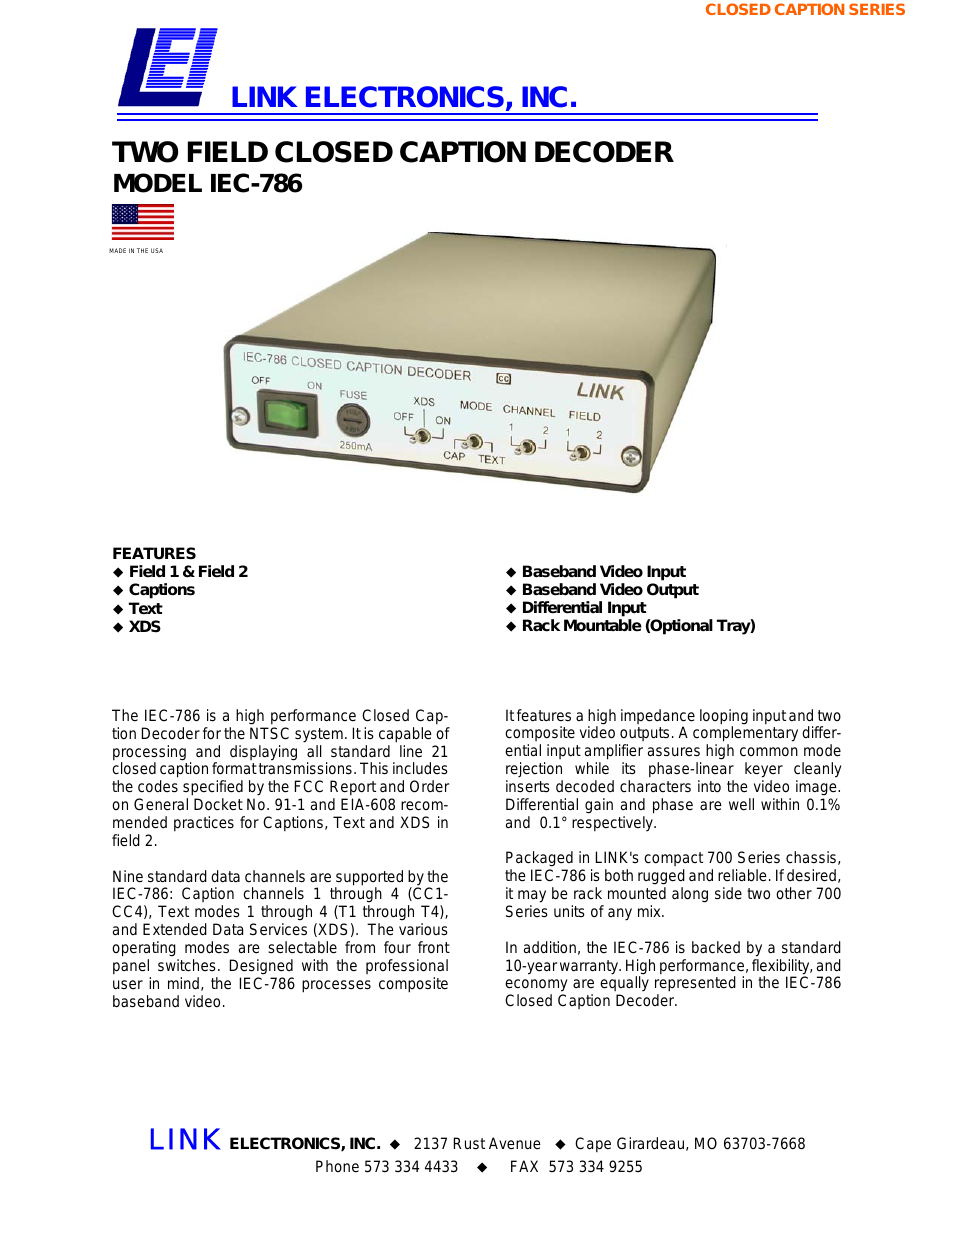 Two Field Closed Caption Decoder IEC-786